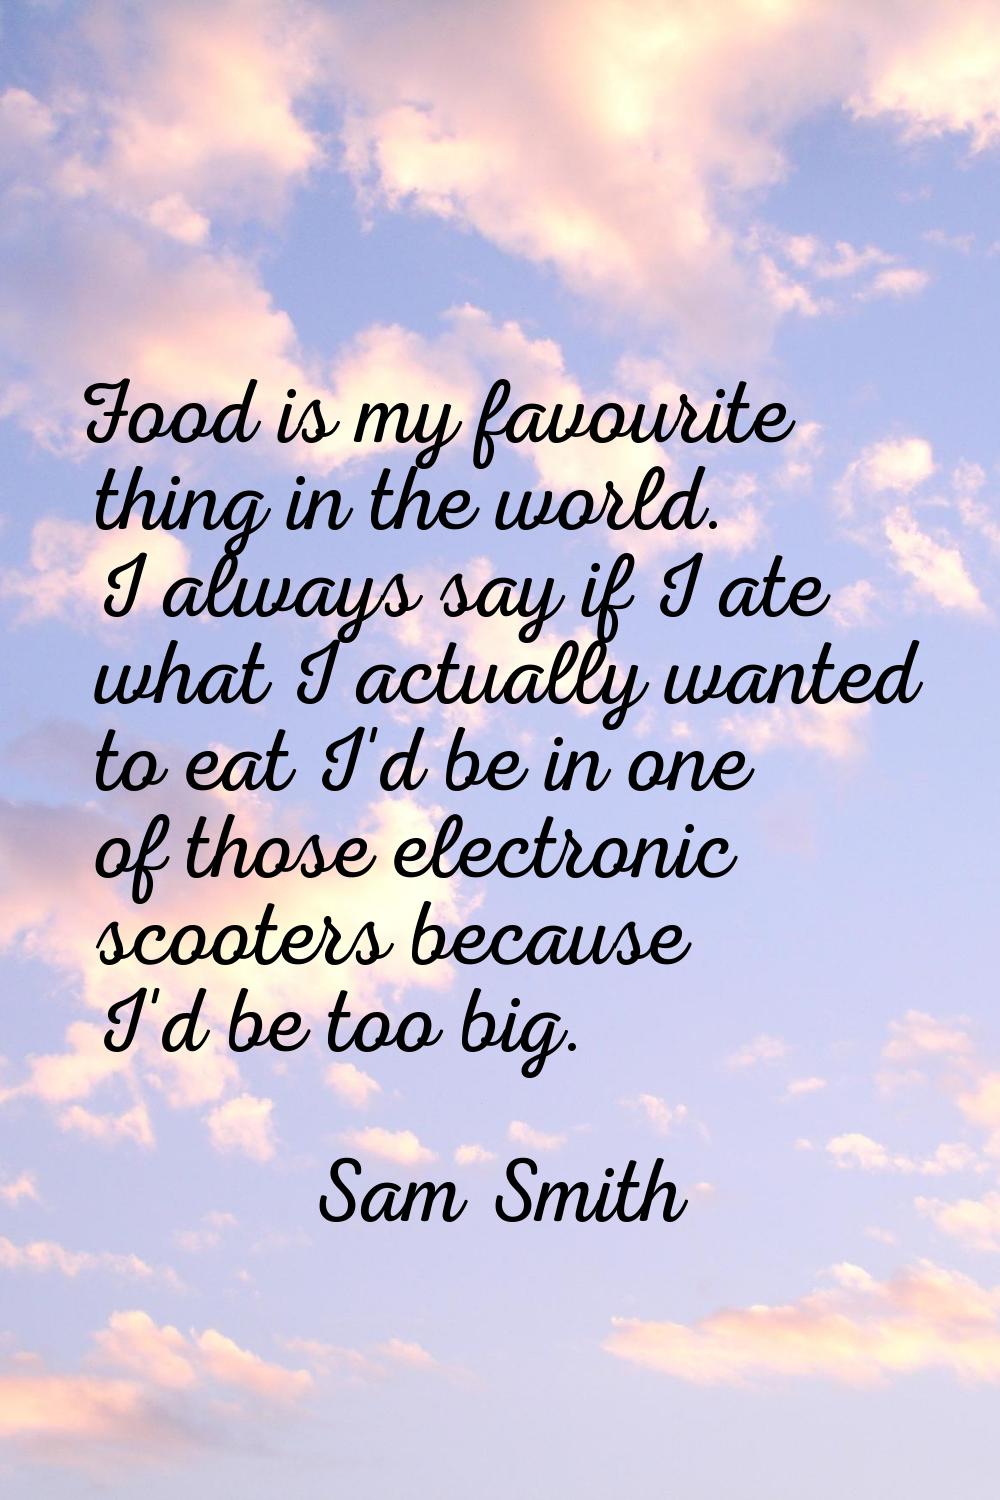 Food is my favourite thing in the world. I always say if I ate what I actually wanted to eat I'd be